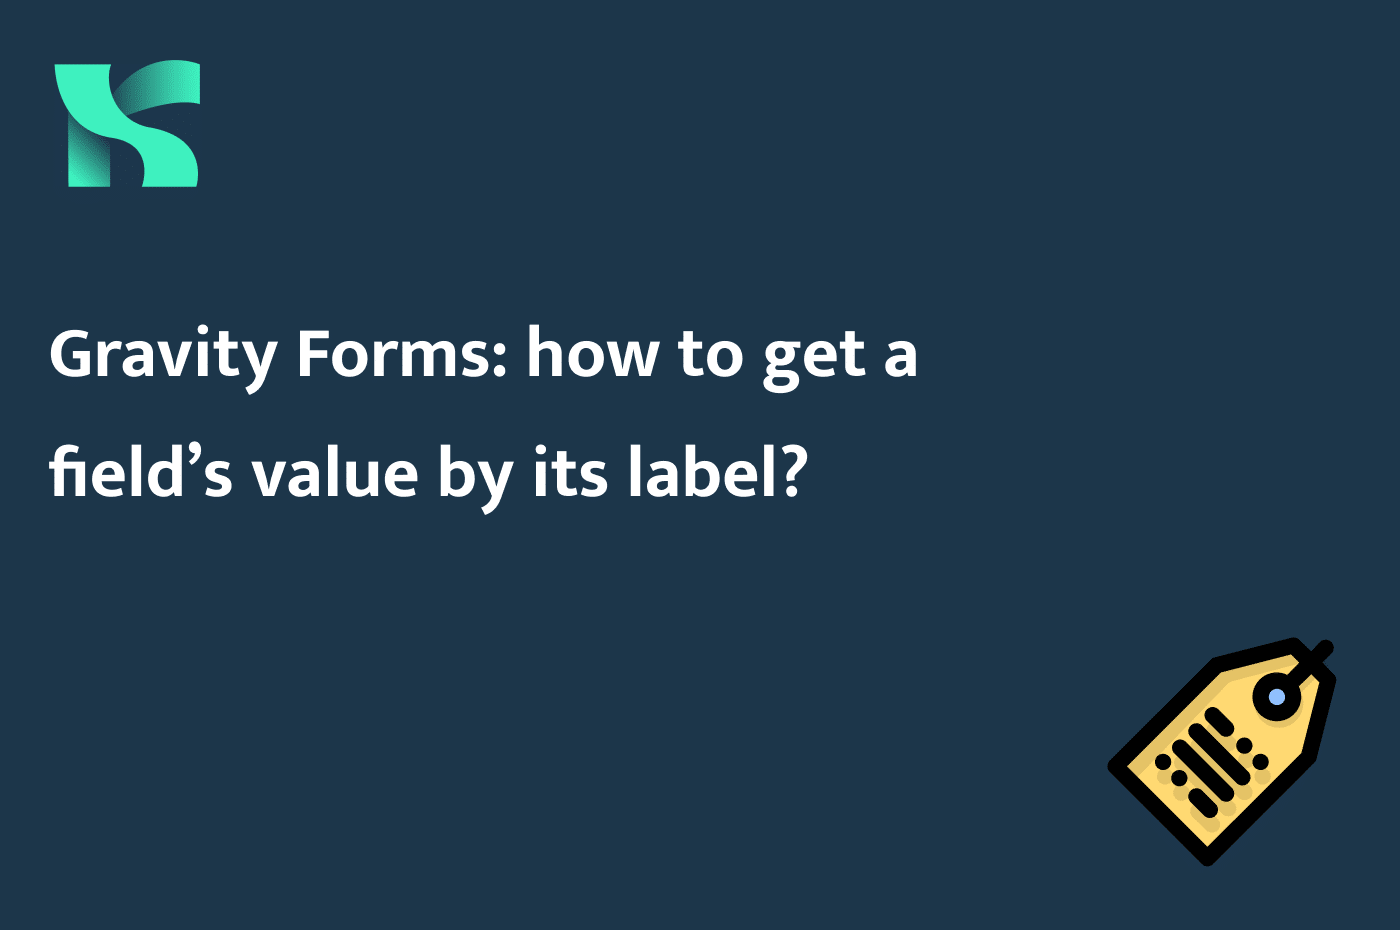 How to get a field’s value by its label in Gravity Forms?